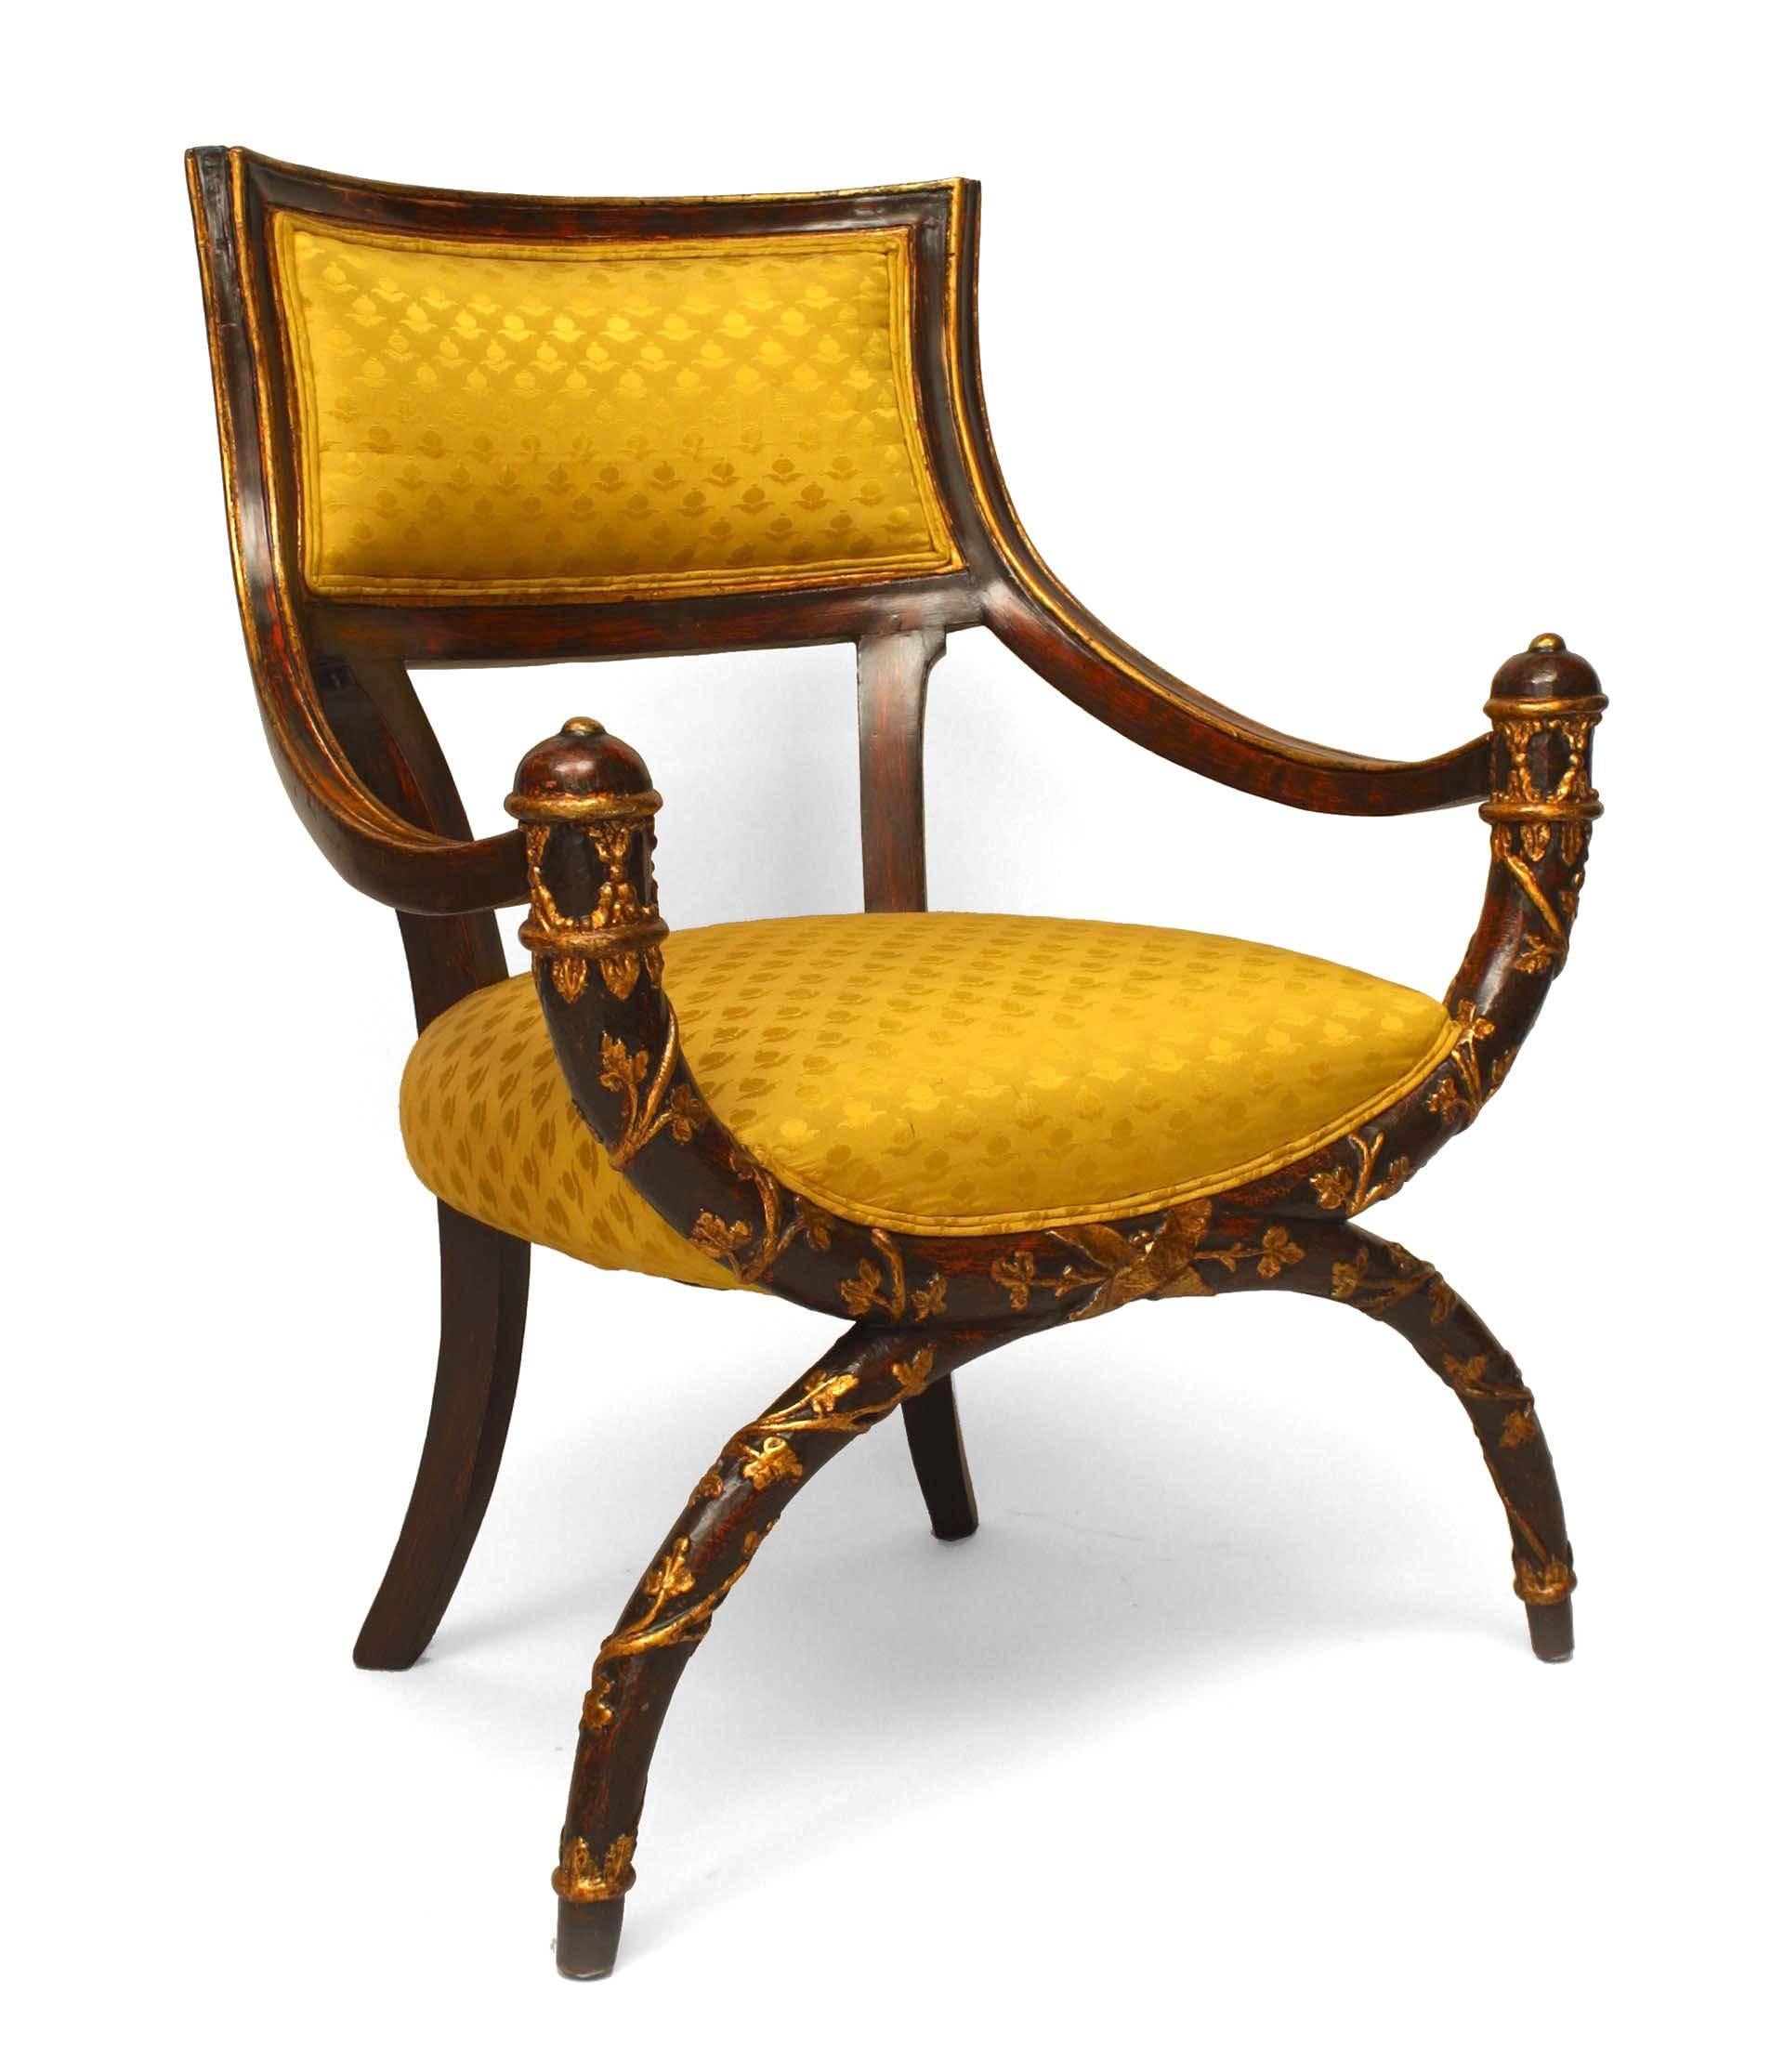 Italian Neoclassic-style (19th Century) X design maroon lacquered armchair with gilt floral trim and gold damask upholstery.
